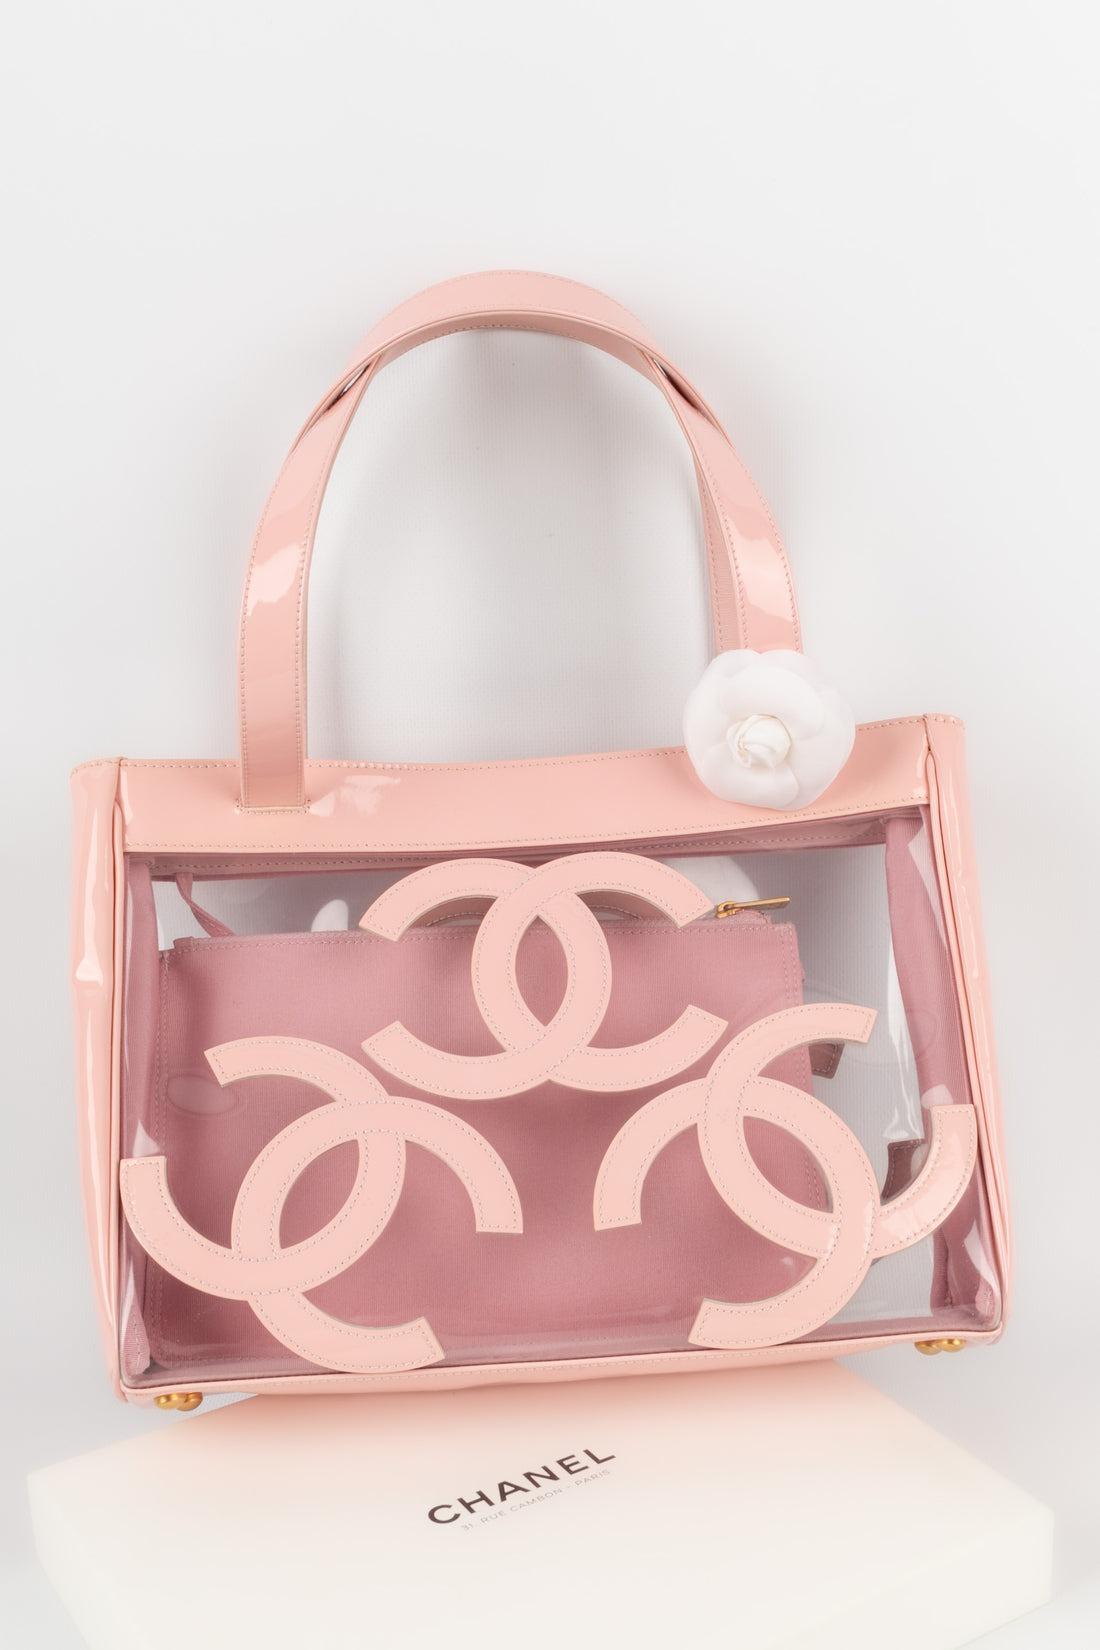 Chanel - (Made in Italy) Bag in transparent PVC fabric and pink patent leather. Sold with serial number and certificate of authenticity. 2004/2005 Collection.

Additional information:
Condition: Very good condition
Dimensions: Length: 28 cm -